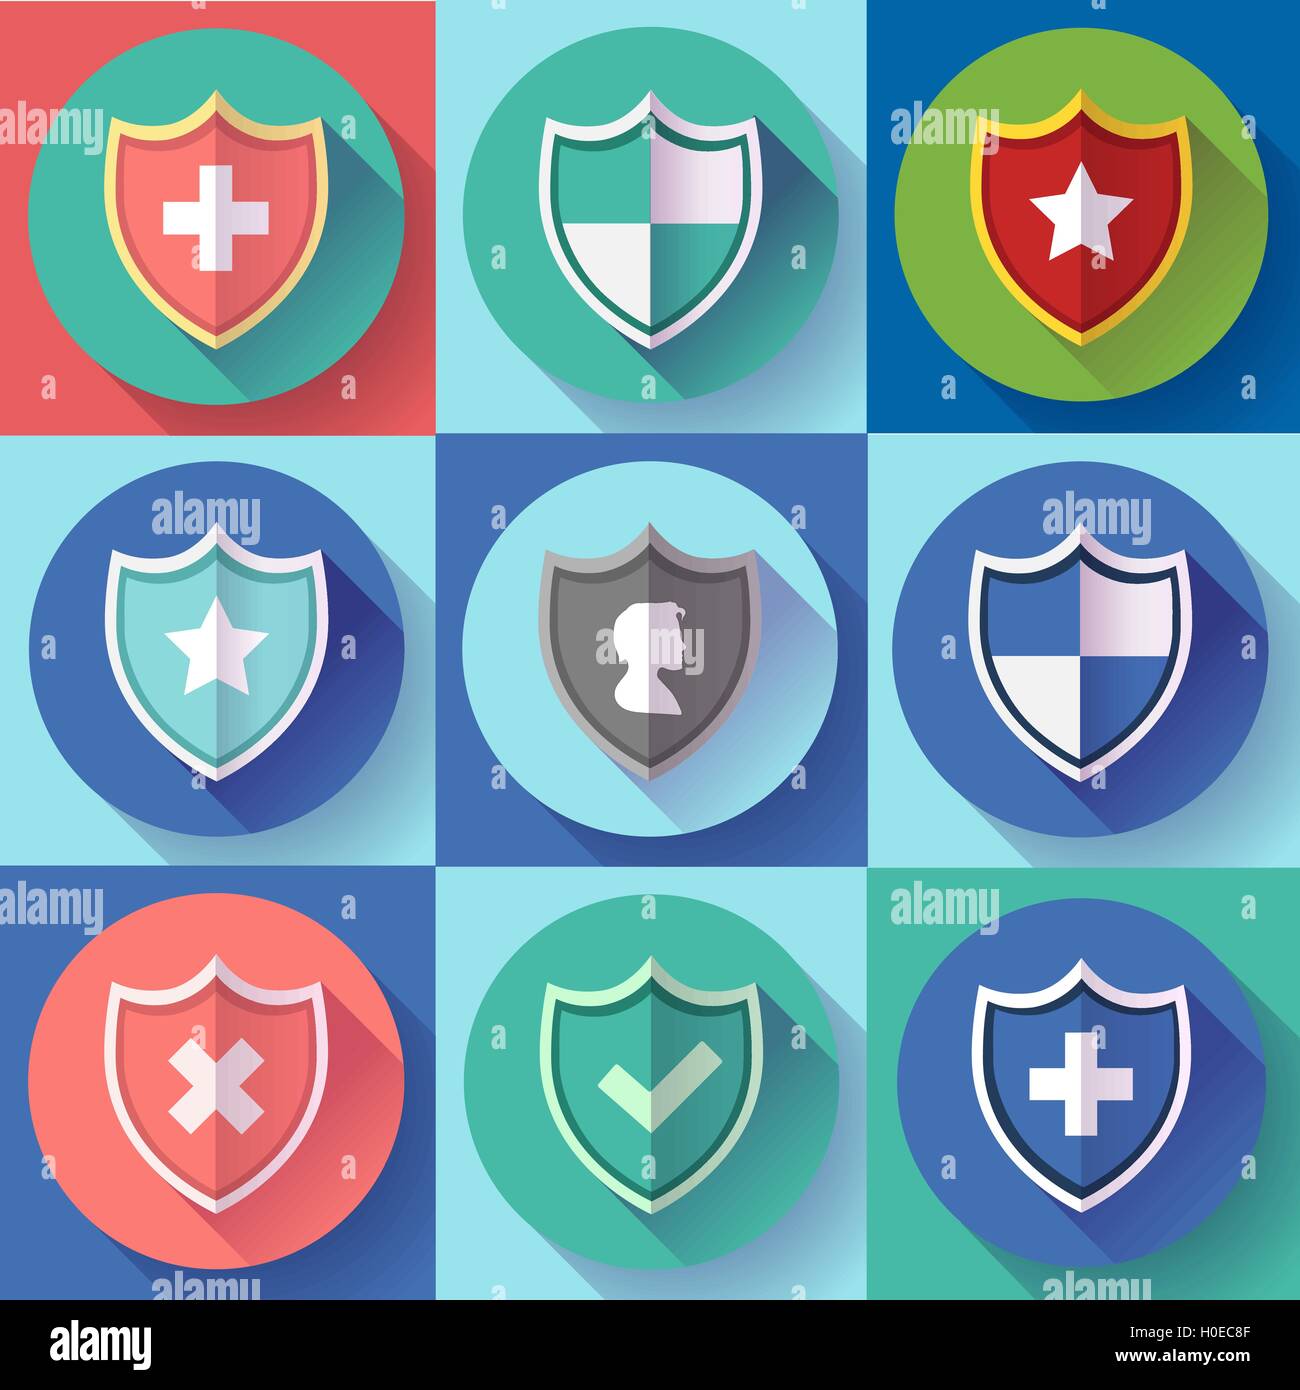 Security shield icon set - protection symbols. Flat design style. Stock Vector